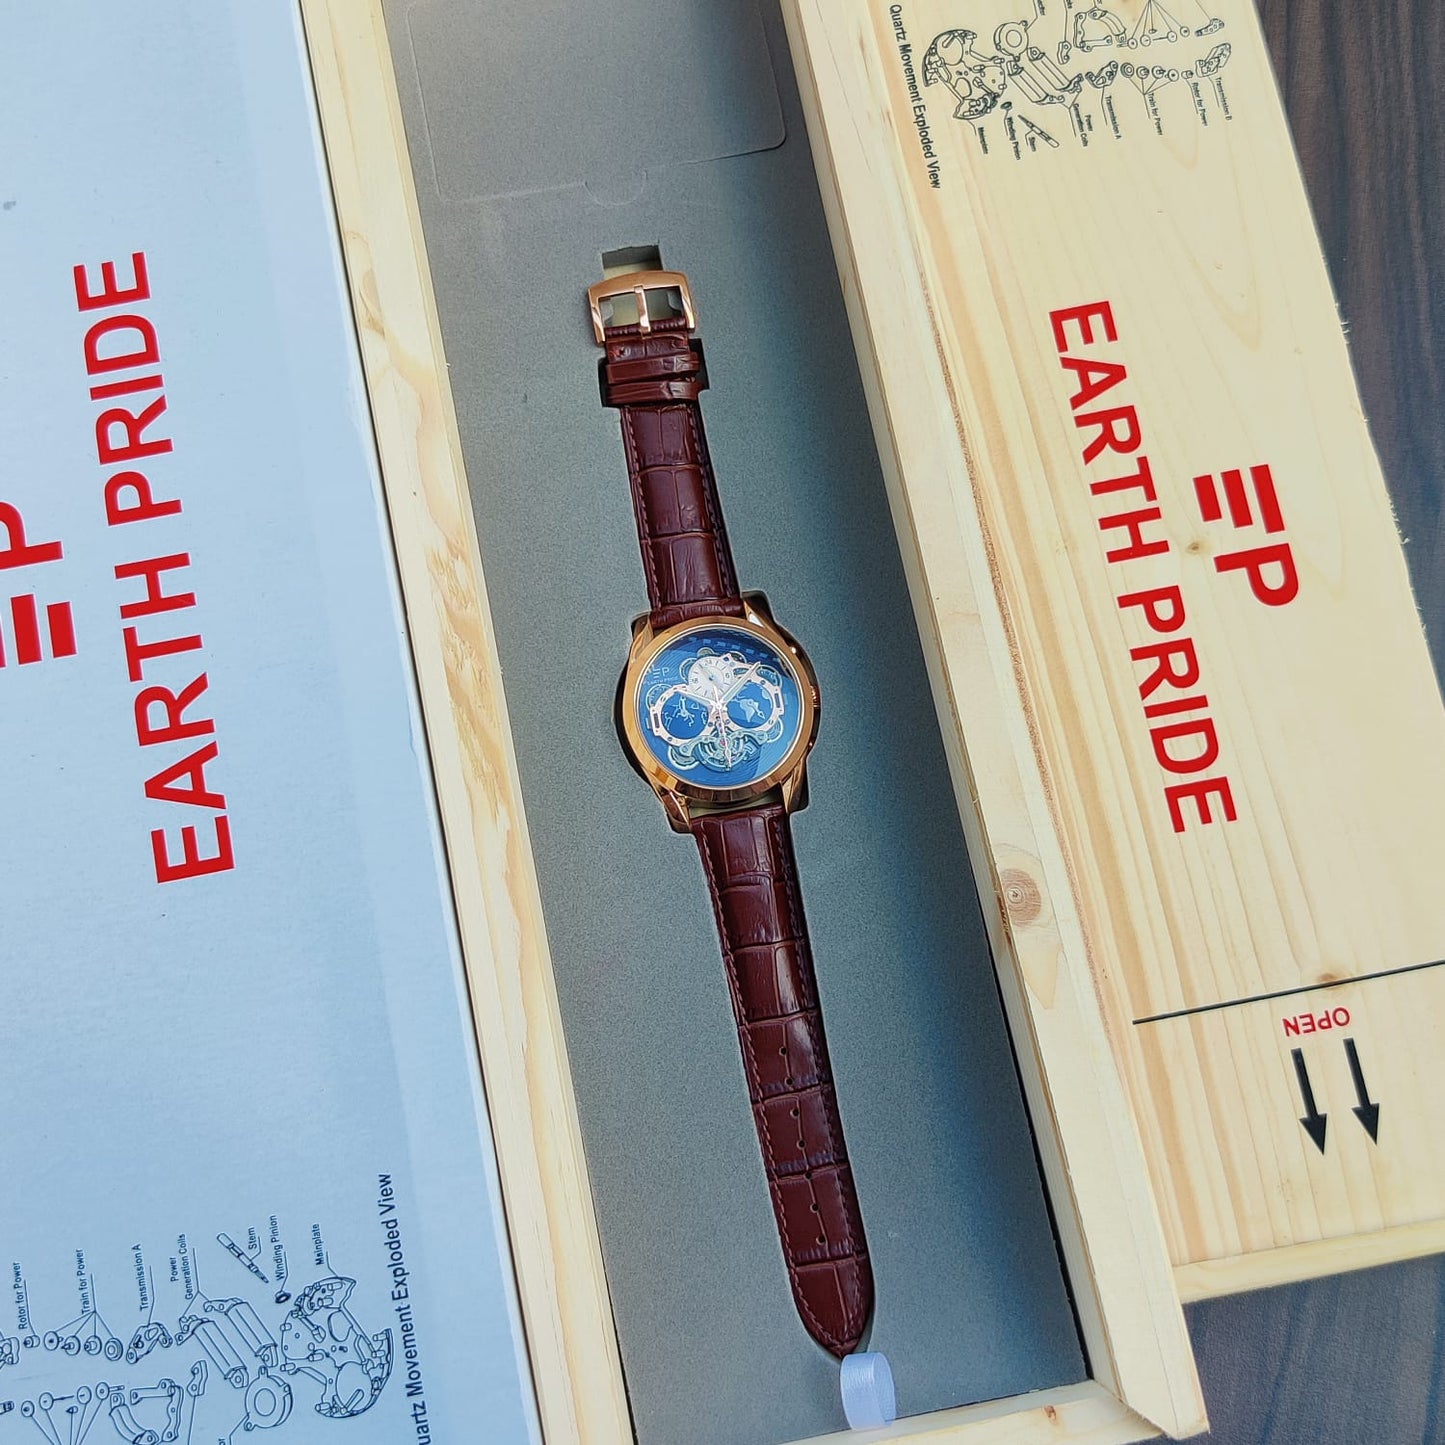 Earth Pride Latest rare and Limited Edition EXSO all dial working Men's watch Og box .